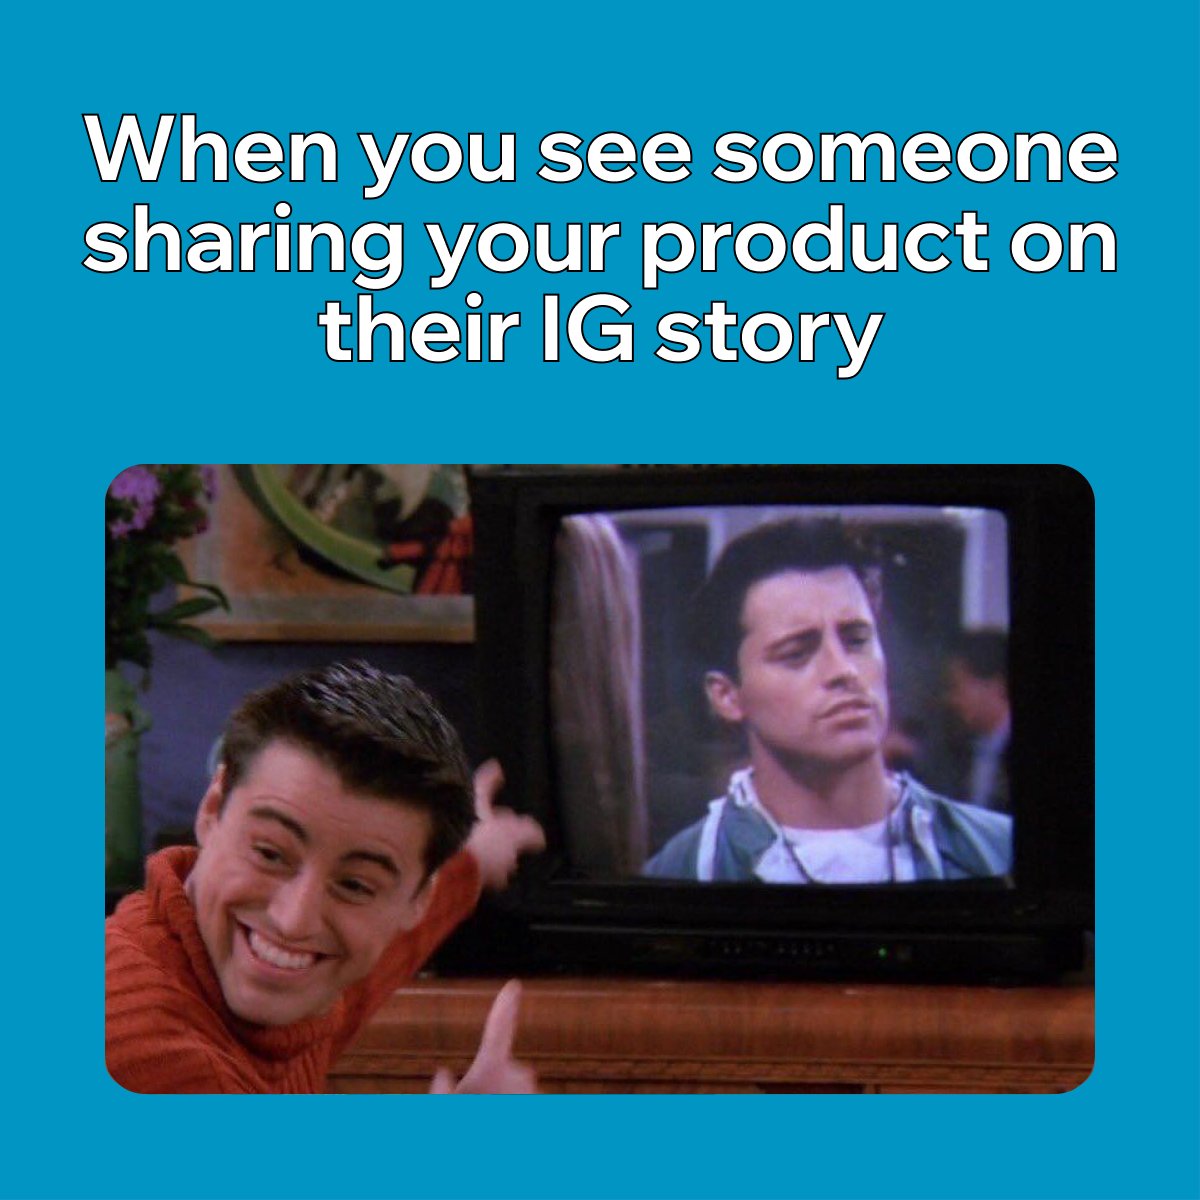 Joey Tribbani from Friends smiling and pointing towards a TV featuring Joey's face. 

Text above on a blue background reads: "When you see someone sharing your product on their IG story"